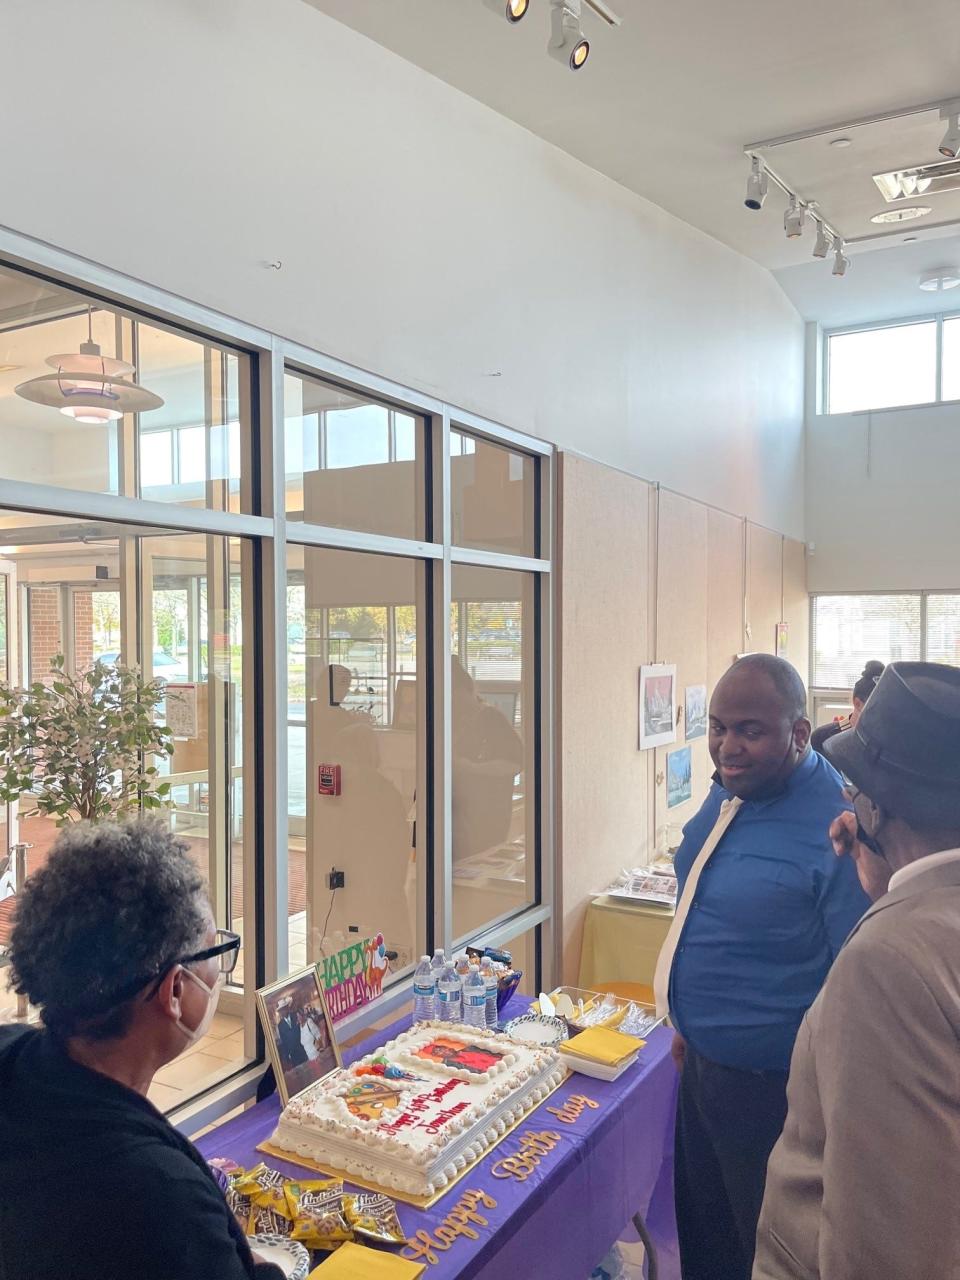 Artist Jonathan Wynn (far right) is shown next to his father Gordon Wynn at the Willingboro Public Library on his birthday. He had an art exhibit at the library on the big day, which was Oct. 28.